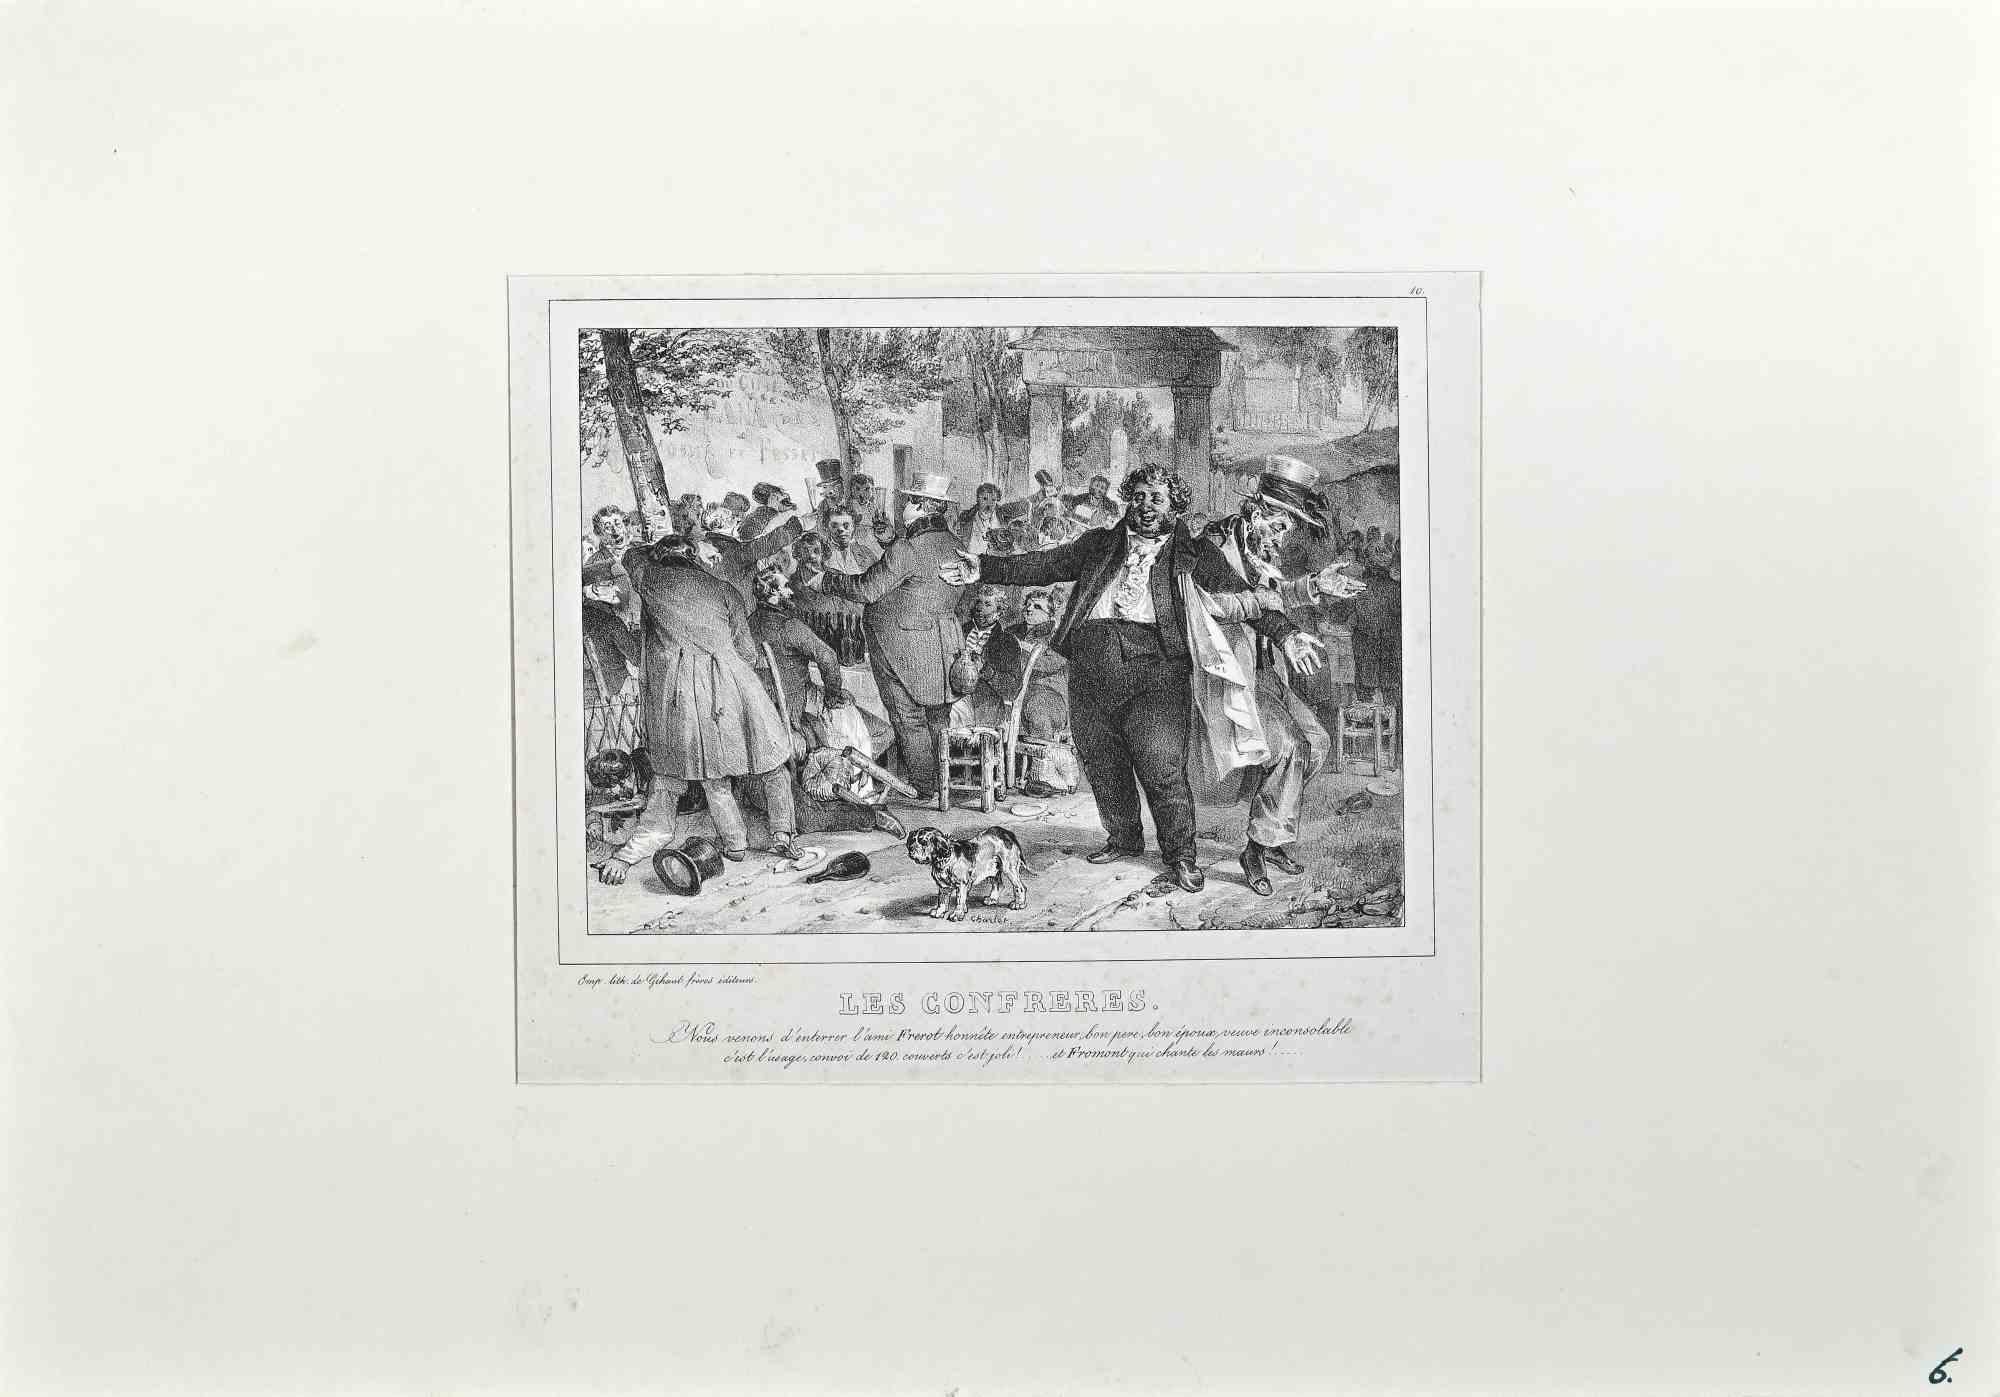 The Confrères is an Original Lithograph realized in 1830 by Nicolas Toussaint Charlet (1792-1845).

Signed on the plate. Titled on the lower.

With the description on the lower.

Good condition on a ivory colored paper including a white colored